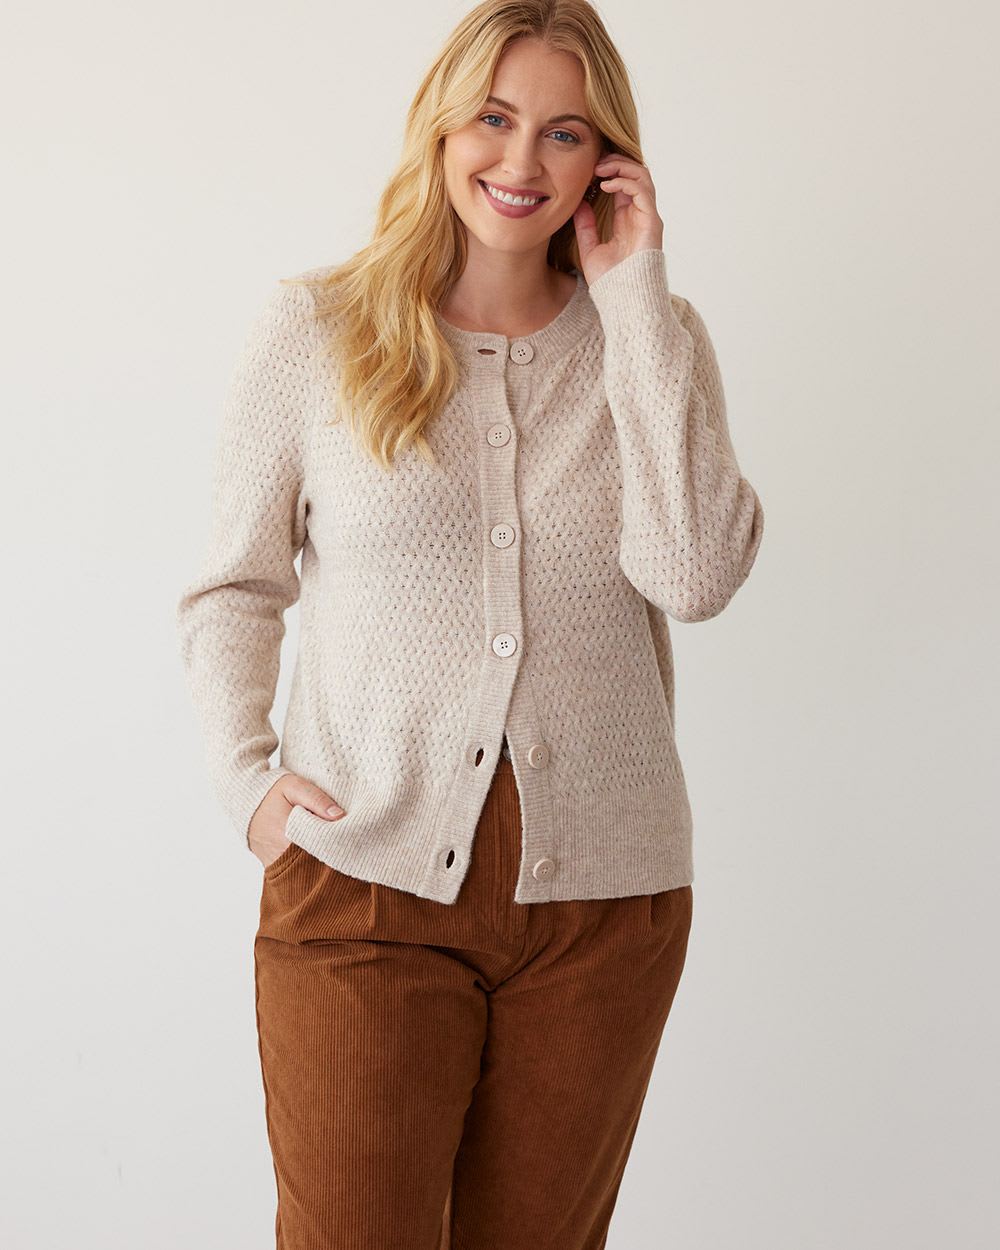 Textured Sweater Jacket  Petite sweaters, Textured sweater, Trendy clothes  for women